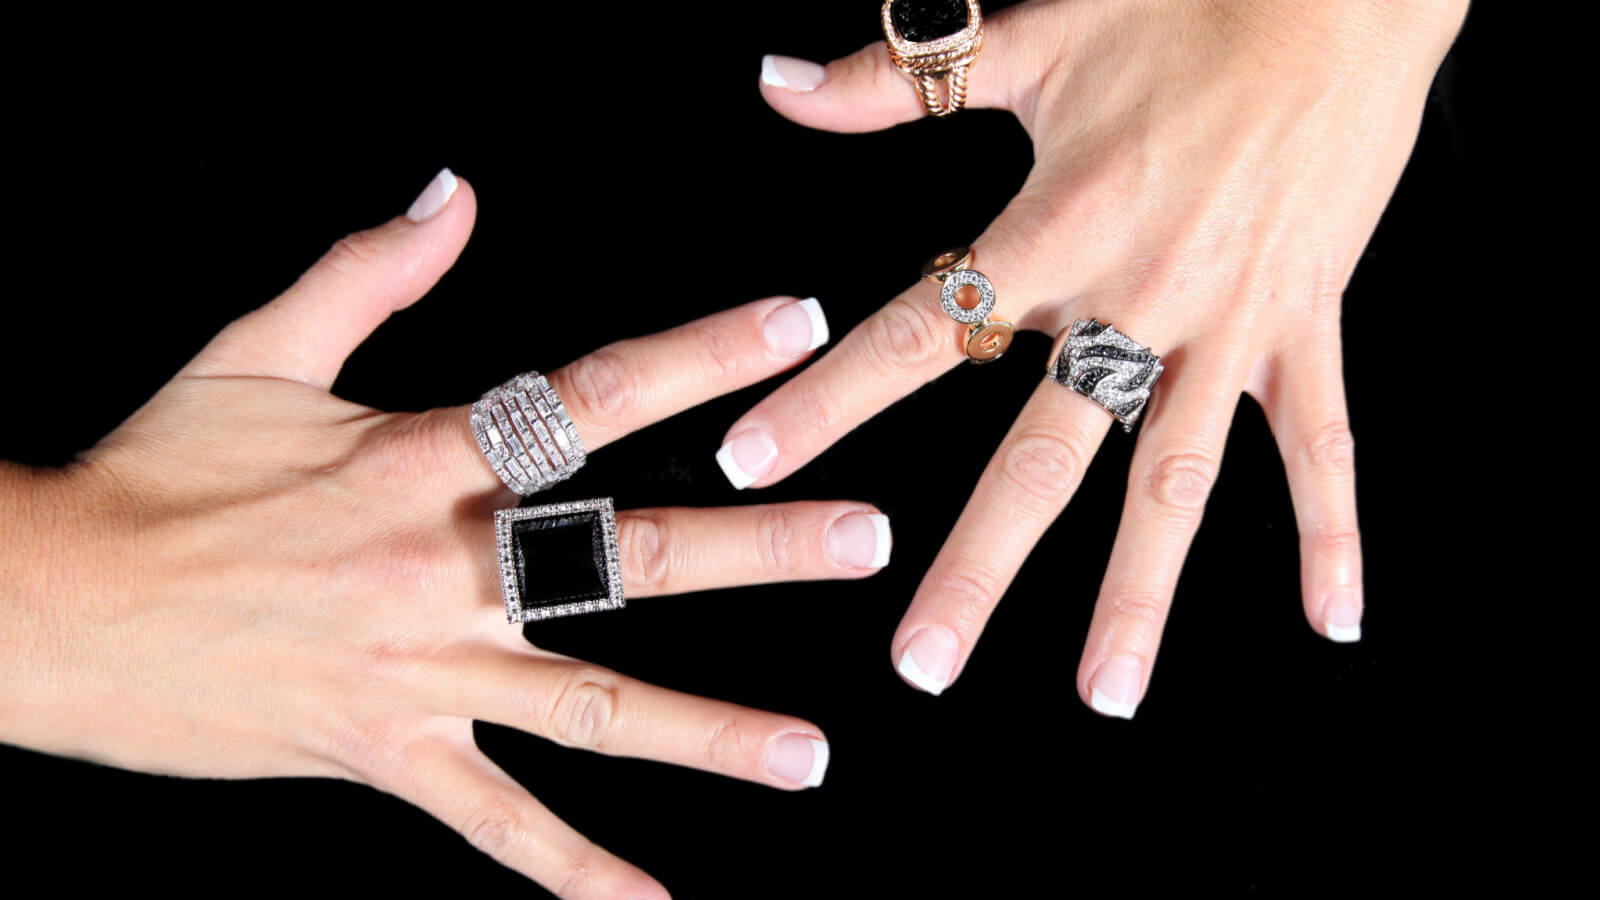 The Significance of Each Ring Finger